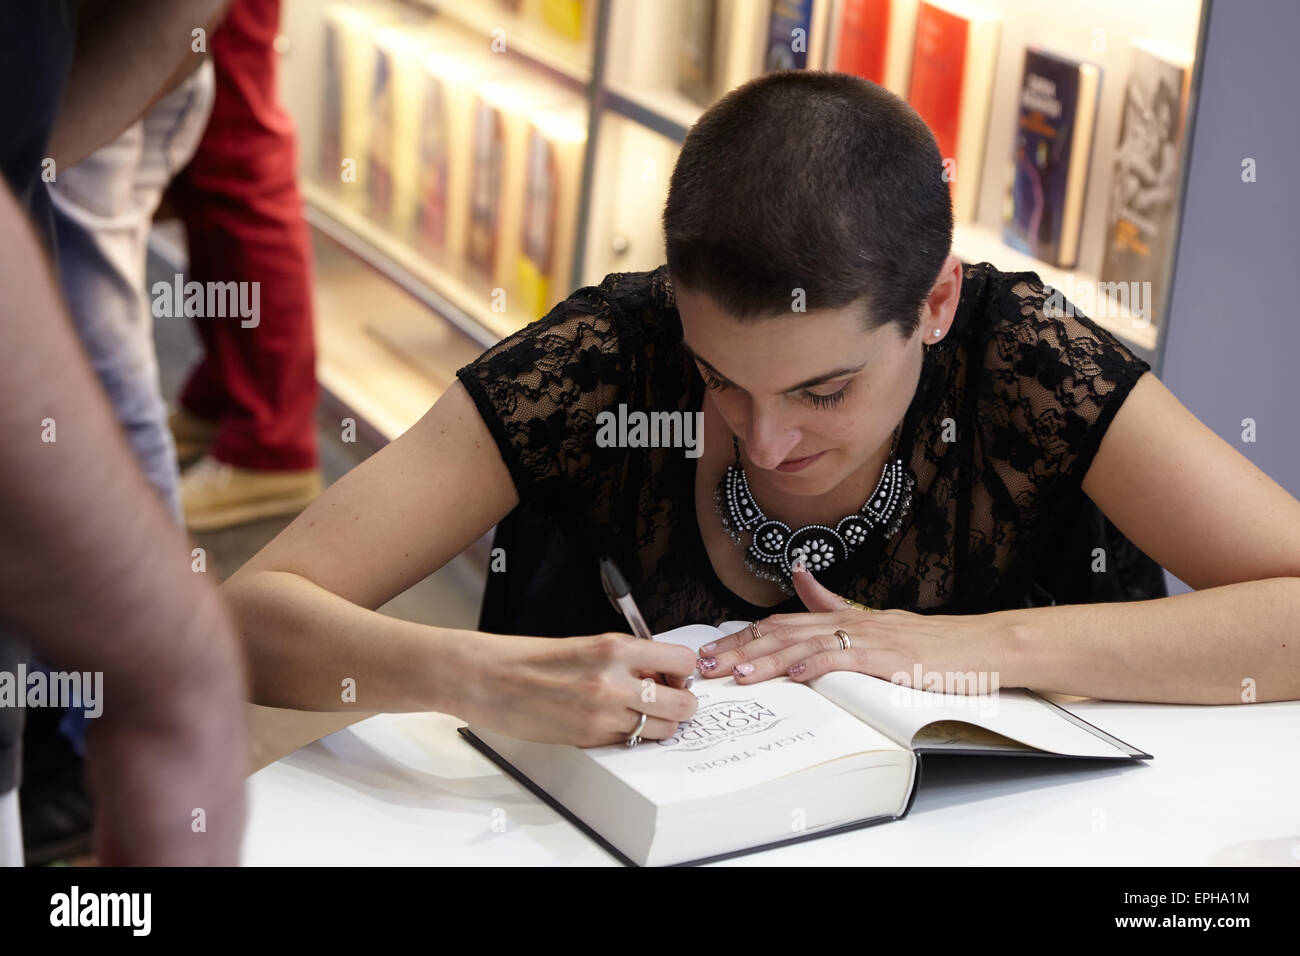 Licia Troisi at Salone del Libro, international book fair signing autographs on May 16, 2015 in Turin Stock Photo